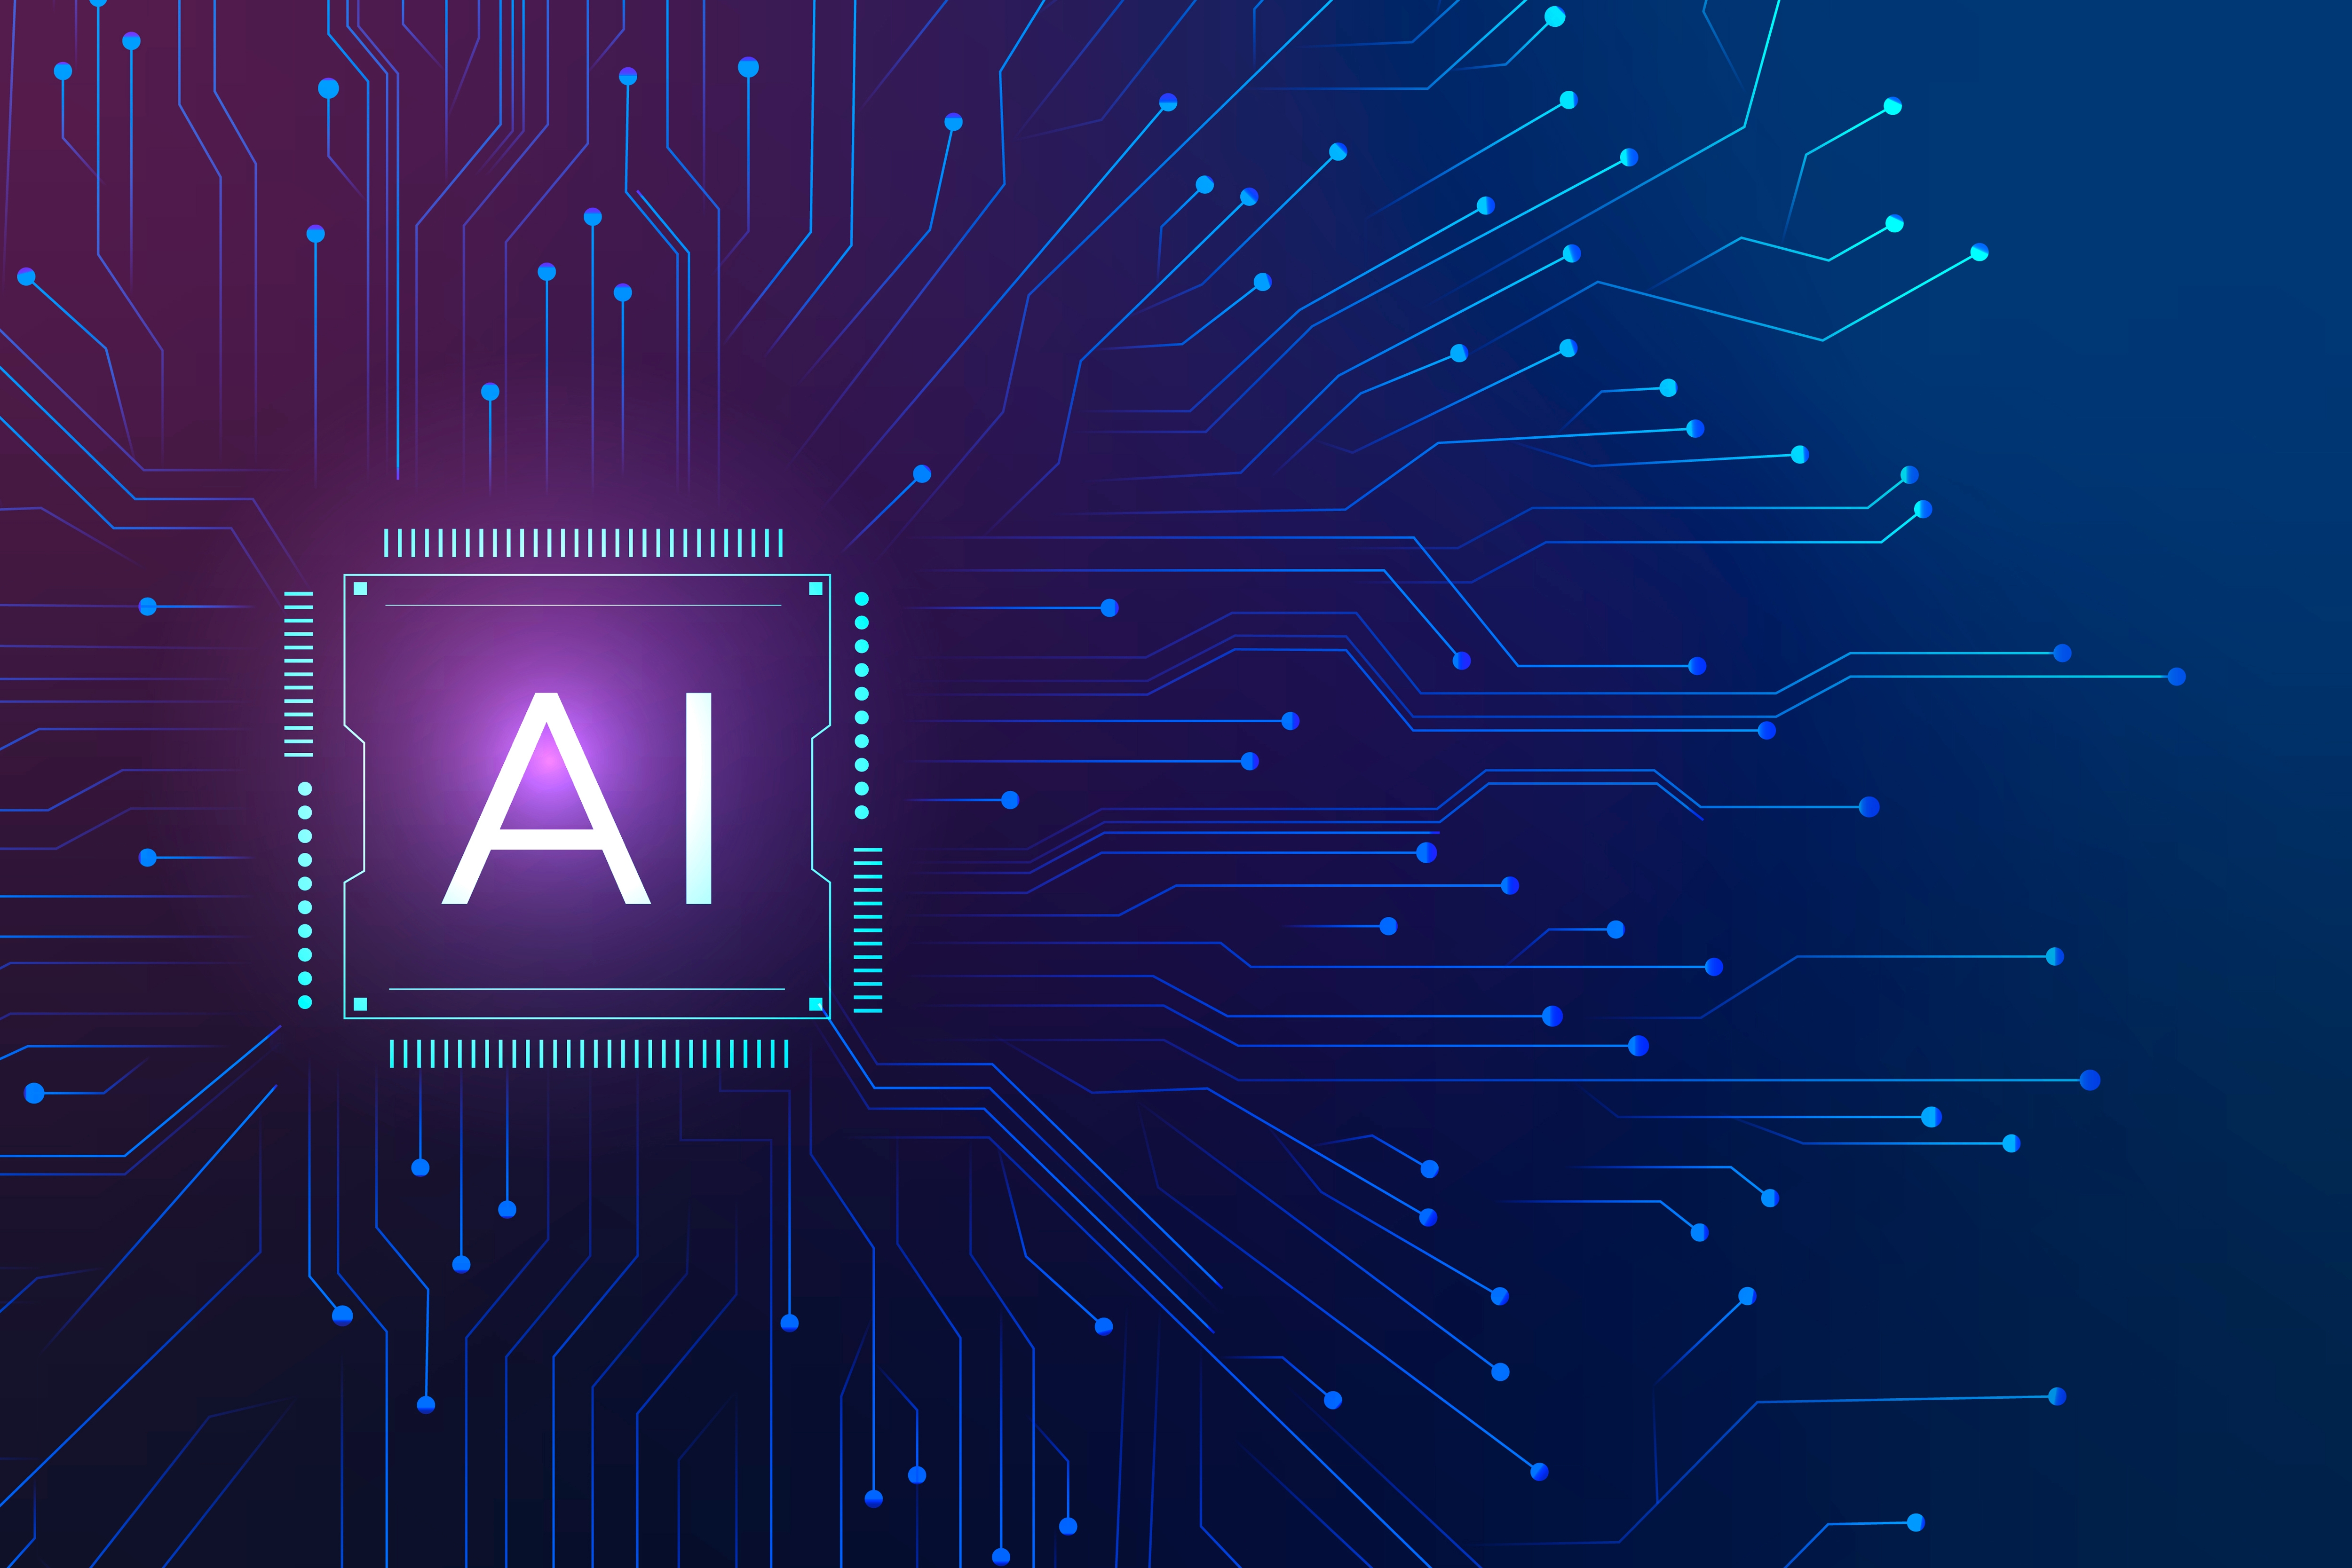 How are AI Chips Making the World a Smarter Place?